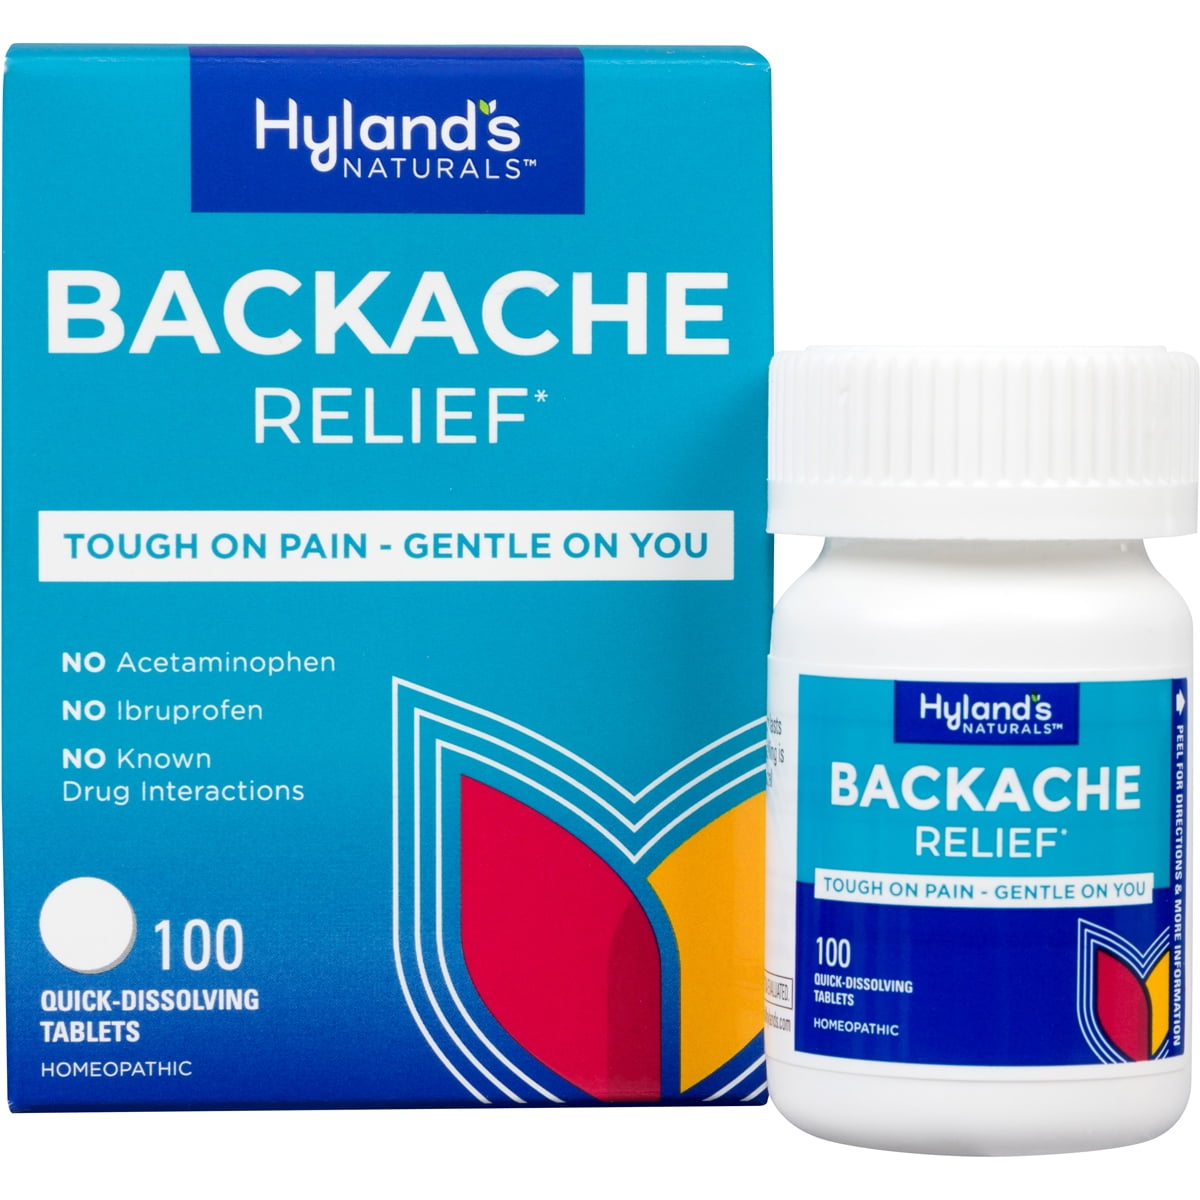 Hyland's Naturals Backache Relief, Natural Pain Relief, 100 Tablets